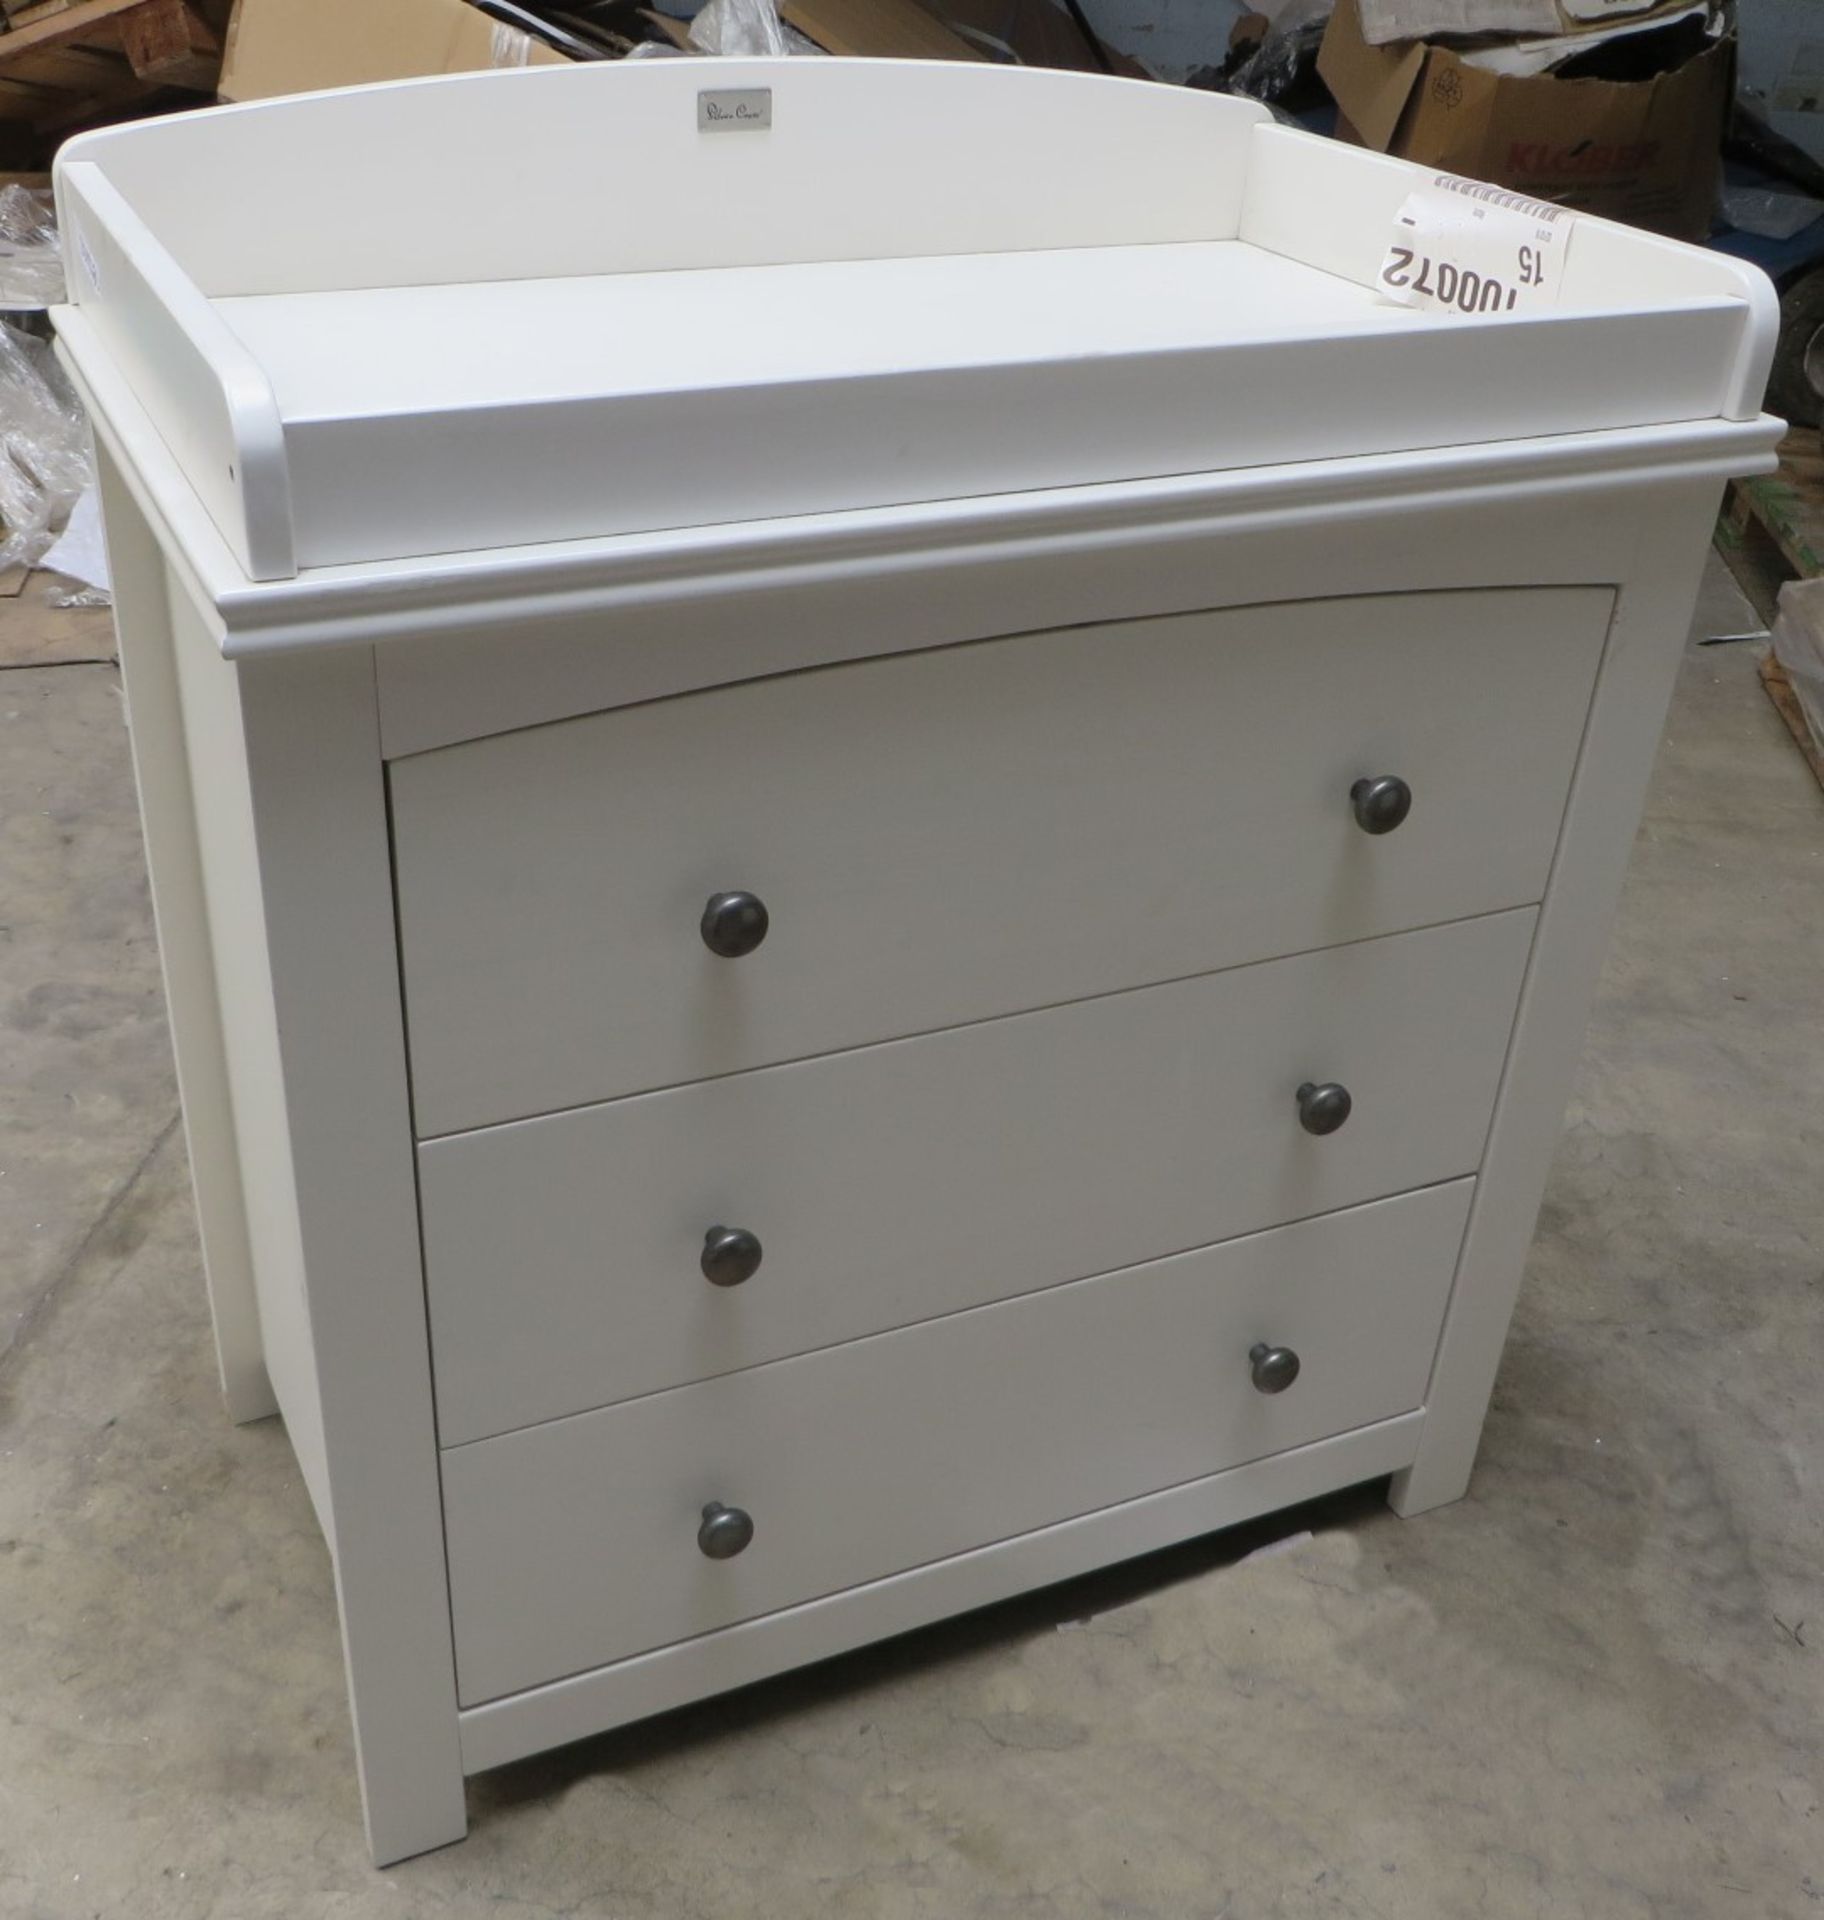 1 x Silver Cross Ashby-Style Combination Changer And Dresser - Nursery Furniture - 88x52x97.5cm - - Image 3 of 14